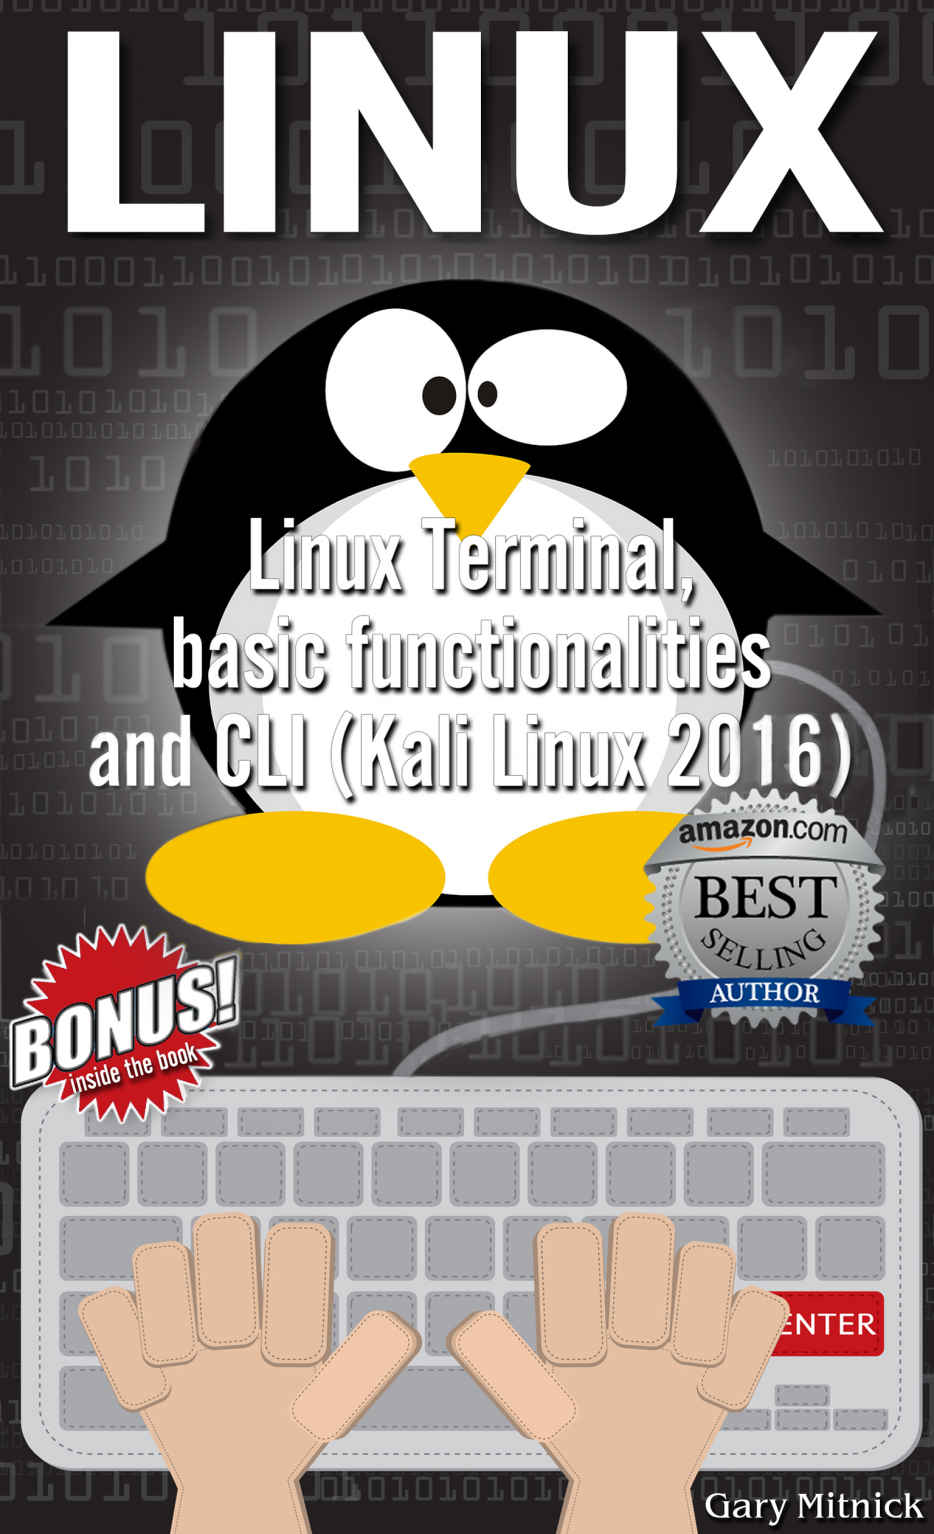 LINUX: Linux Terminal, basic functionalities and CLI (Kali Linux 2016) (wireless hacking, penetration testing, computer hacking Book 3)